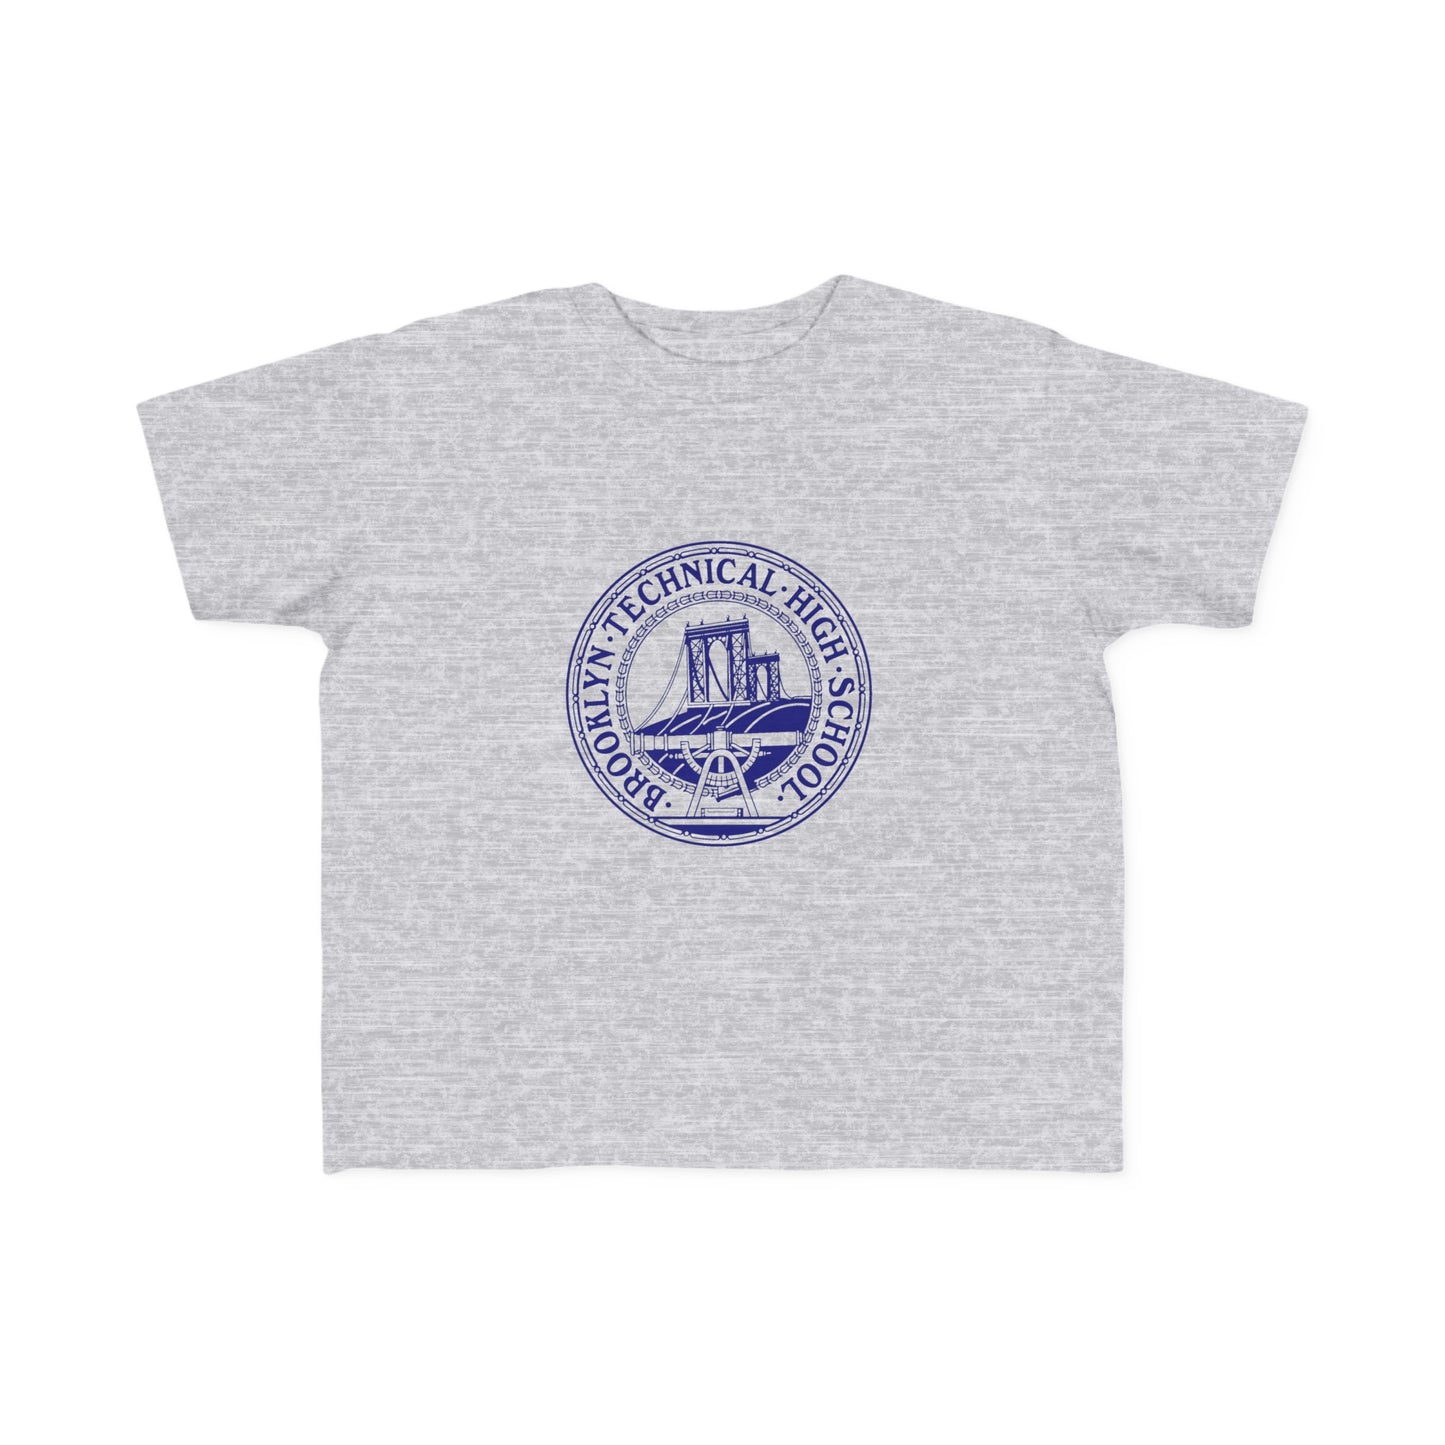 Family - Classic Tech Seal - Toddler's Fine Jersey T-Shirt